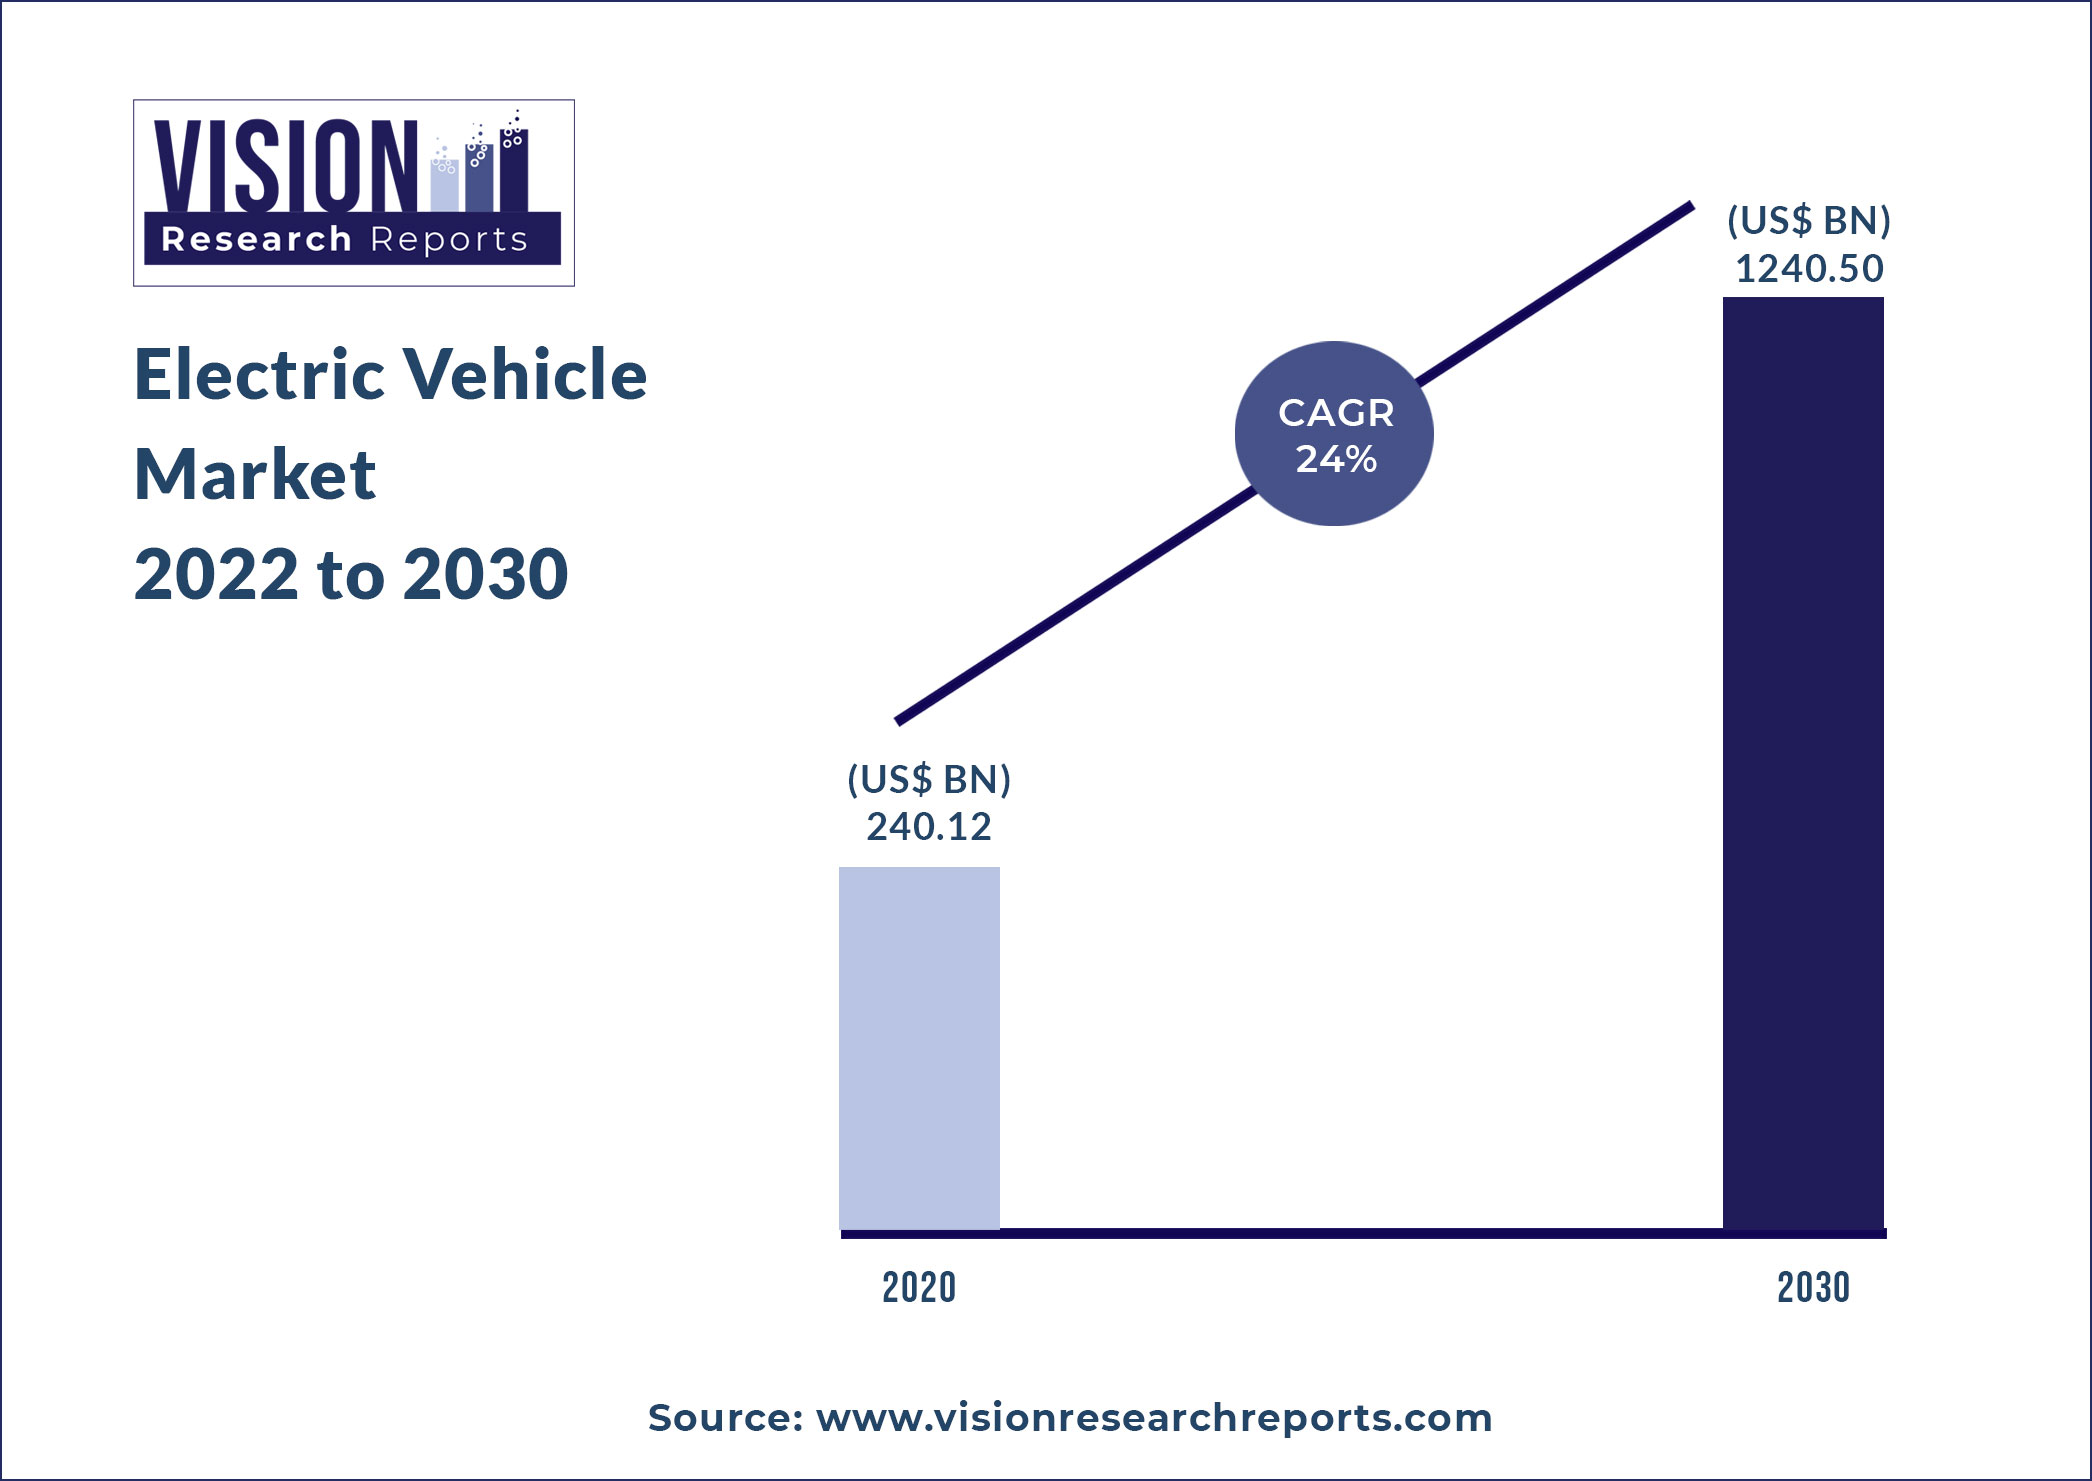 Electric Vehicle Market Size 2022 to 2030